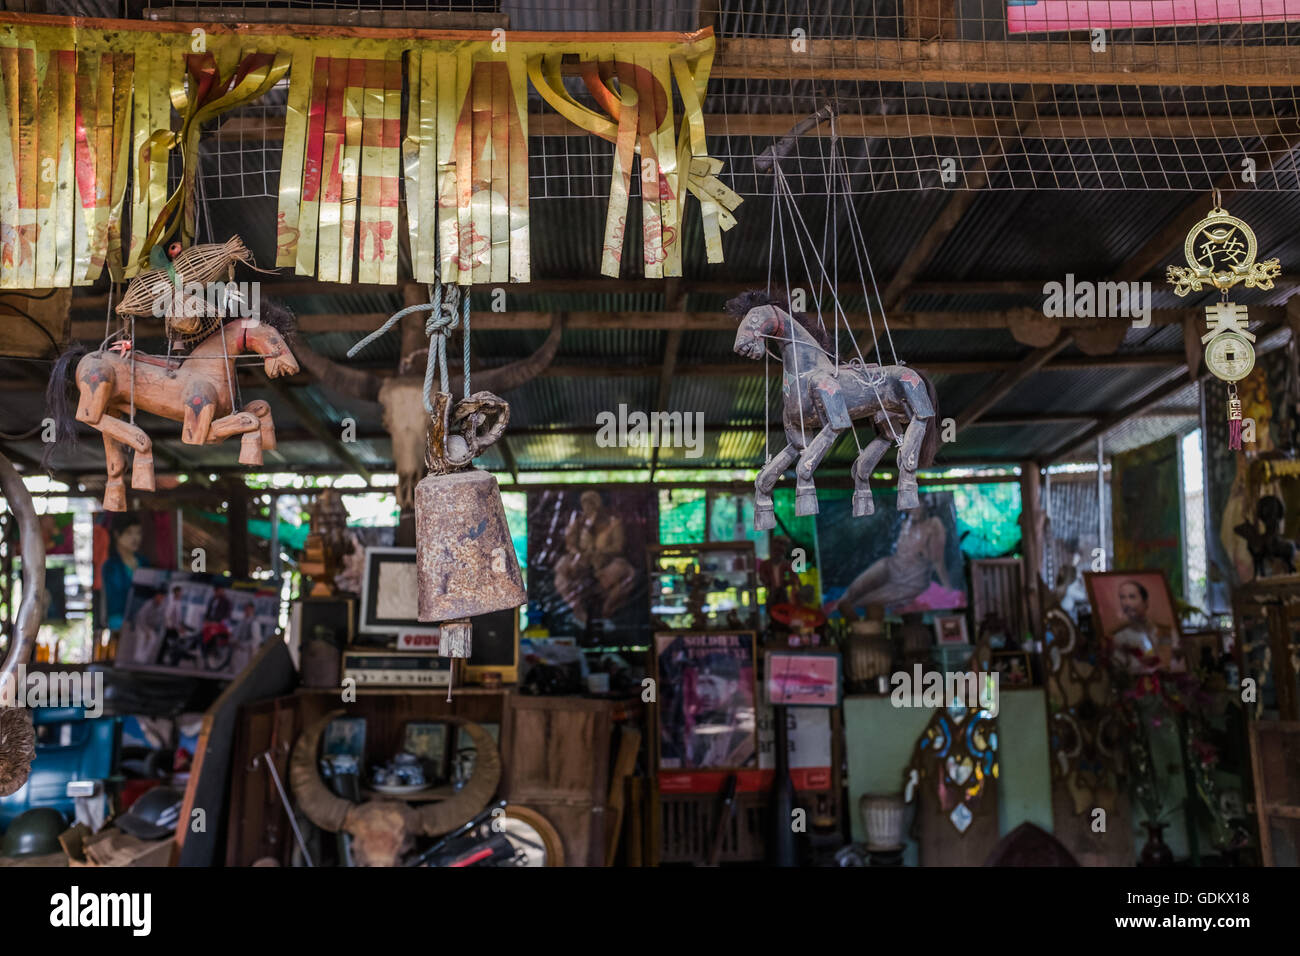 String horse hand puppets for sale in local flea market,Chiang Mai Thailand Stock Photo